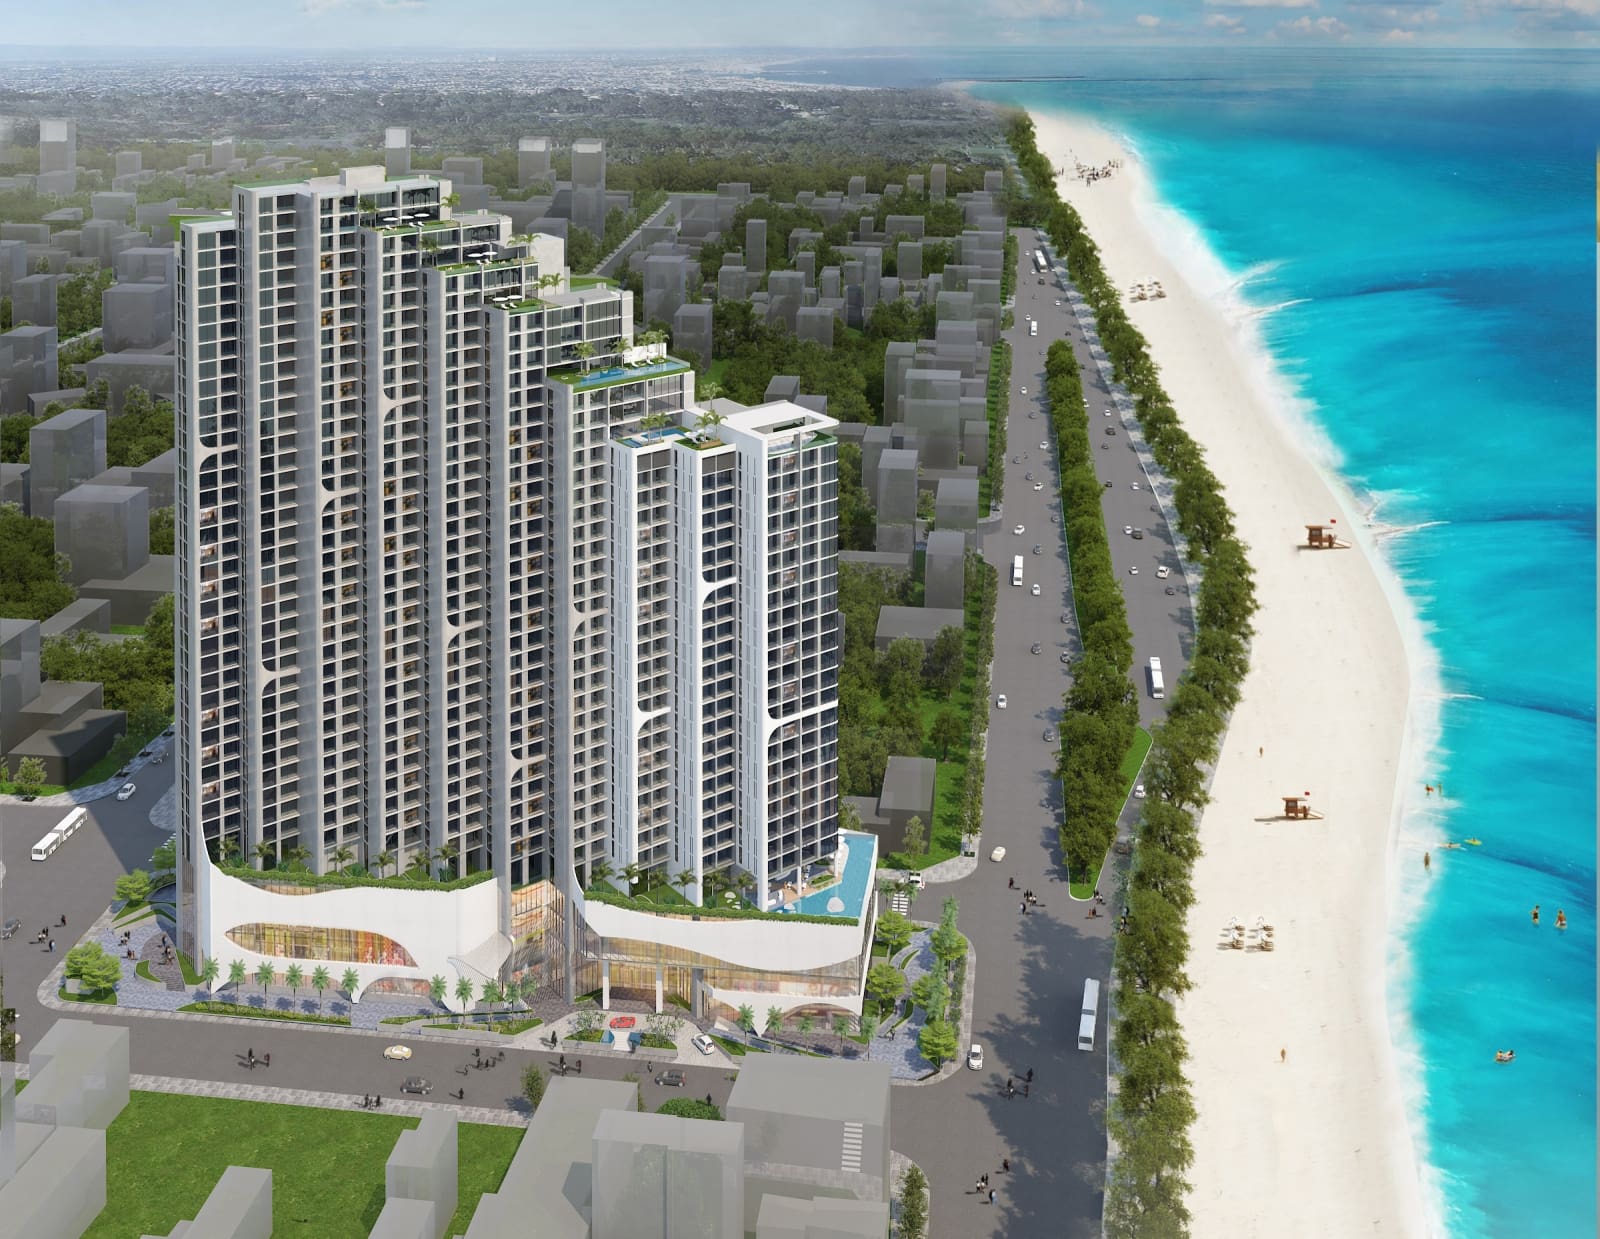 rendered image of aerial view of Scenia Bay along the beachfront